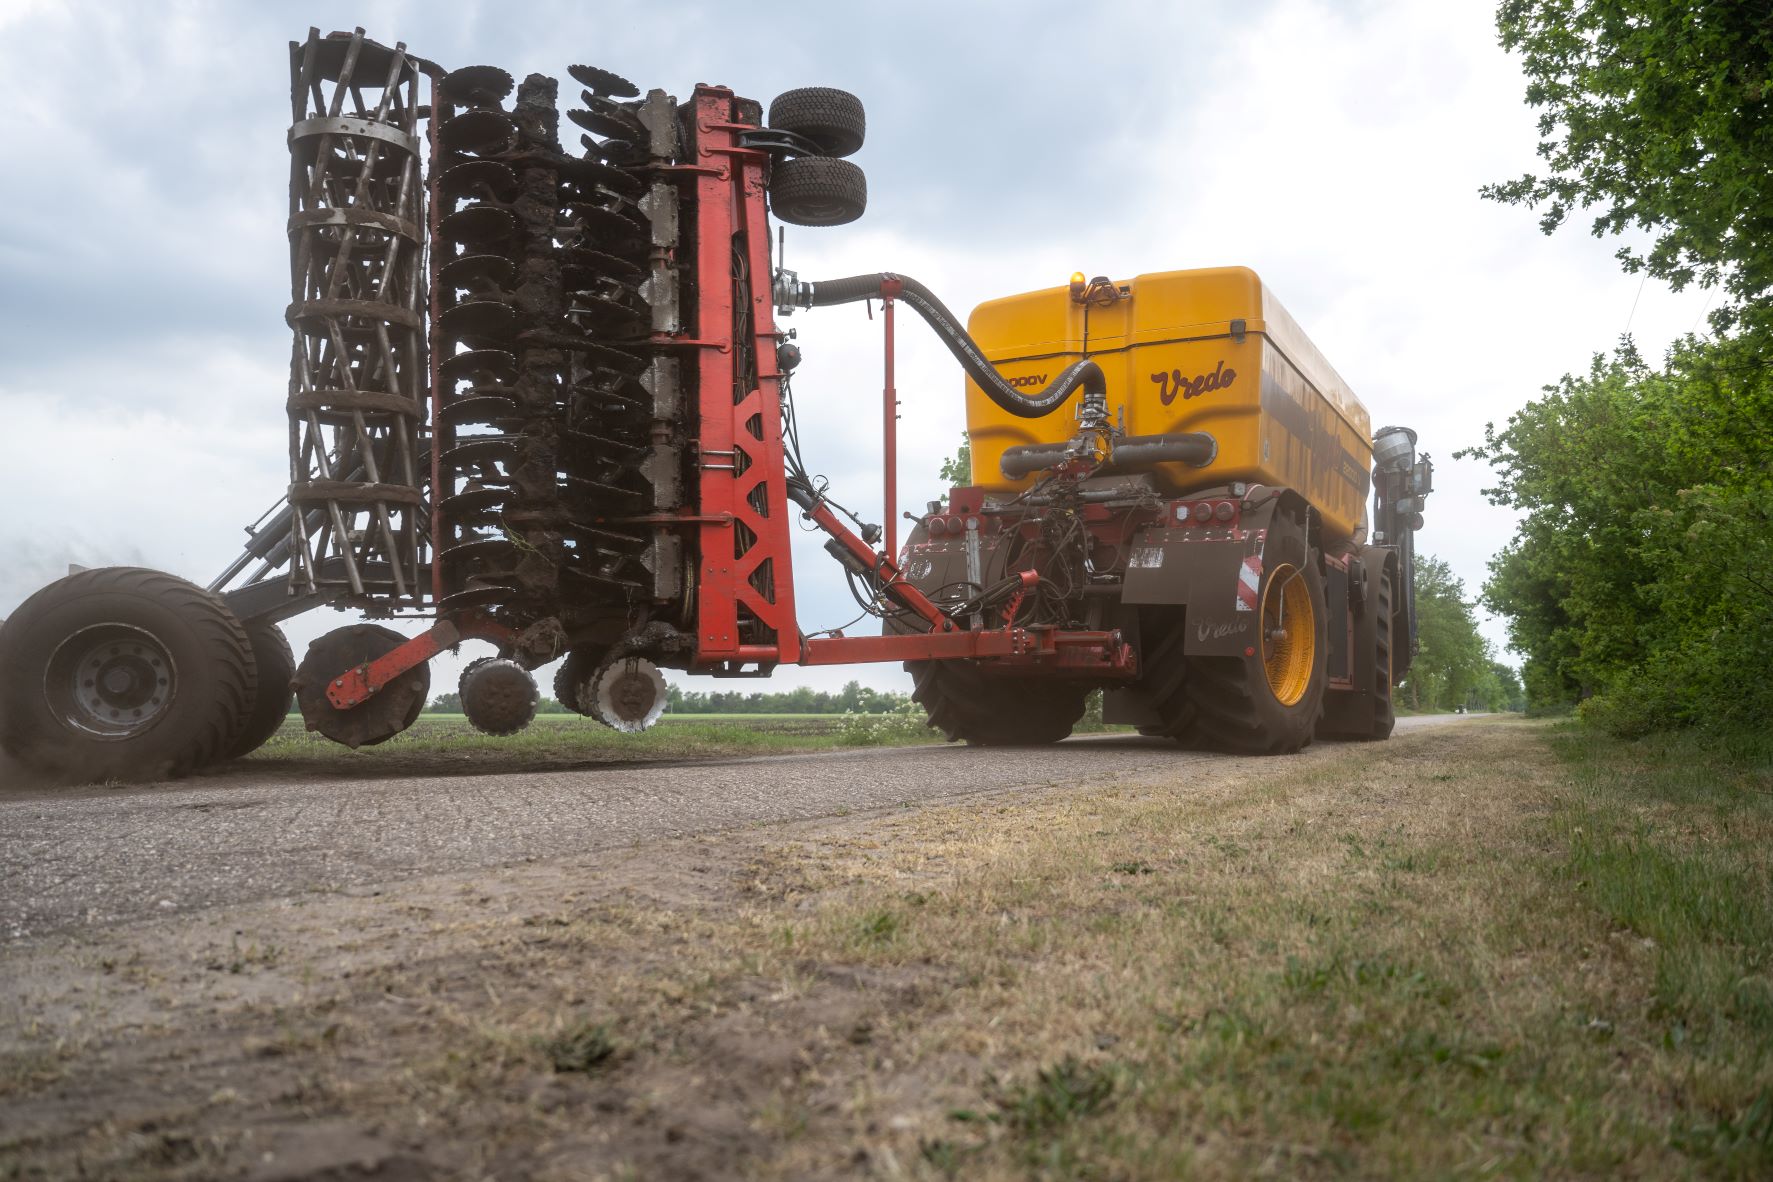 Evers slurry disc harrow, Type Toric XL 1200, with rubber suspension, can be folded into 5 parts